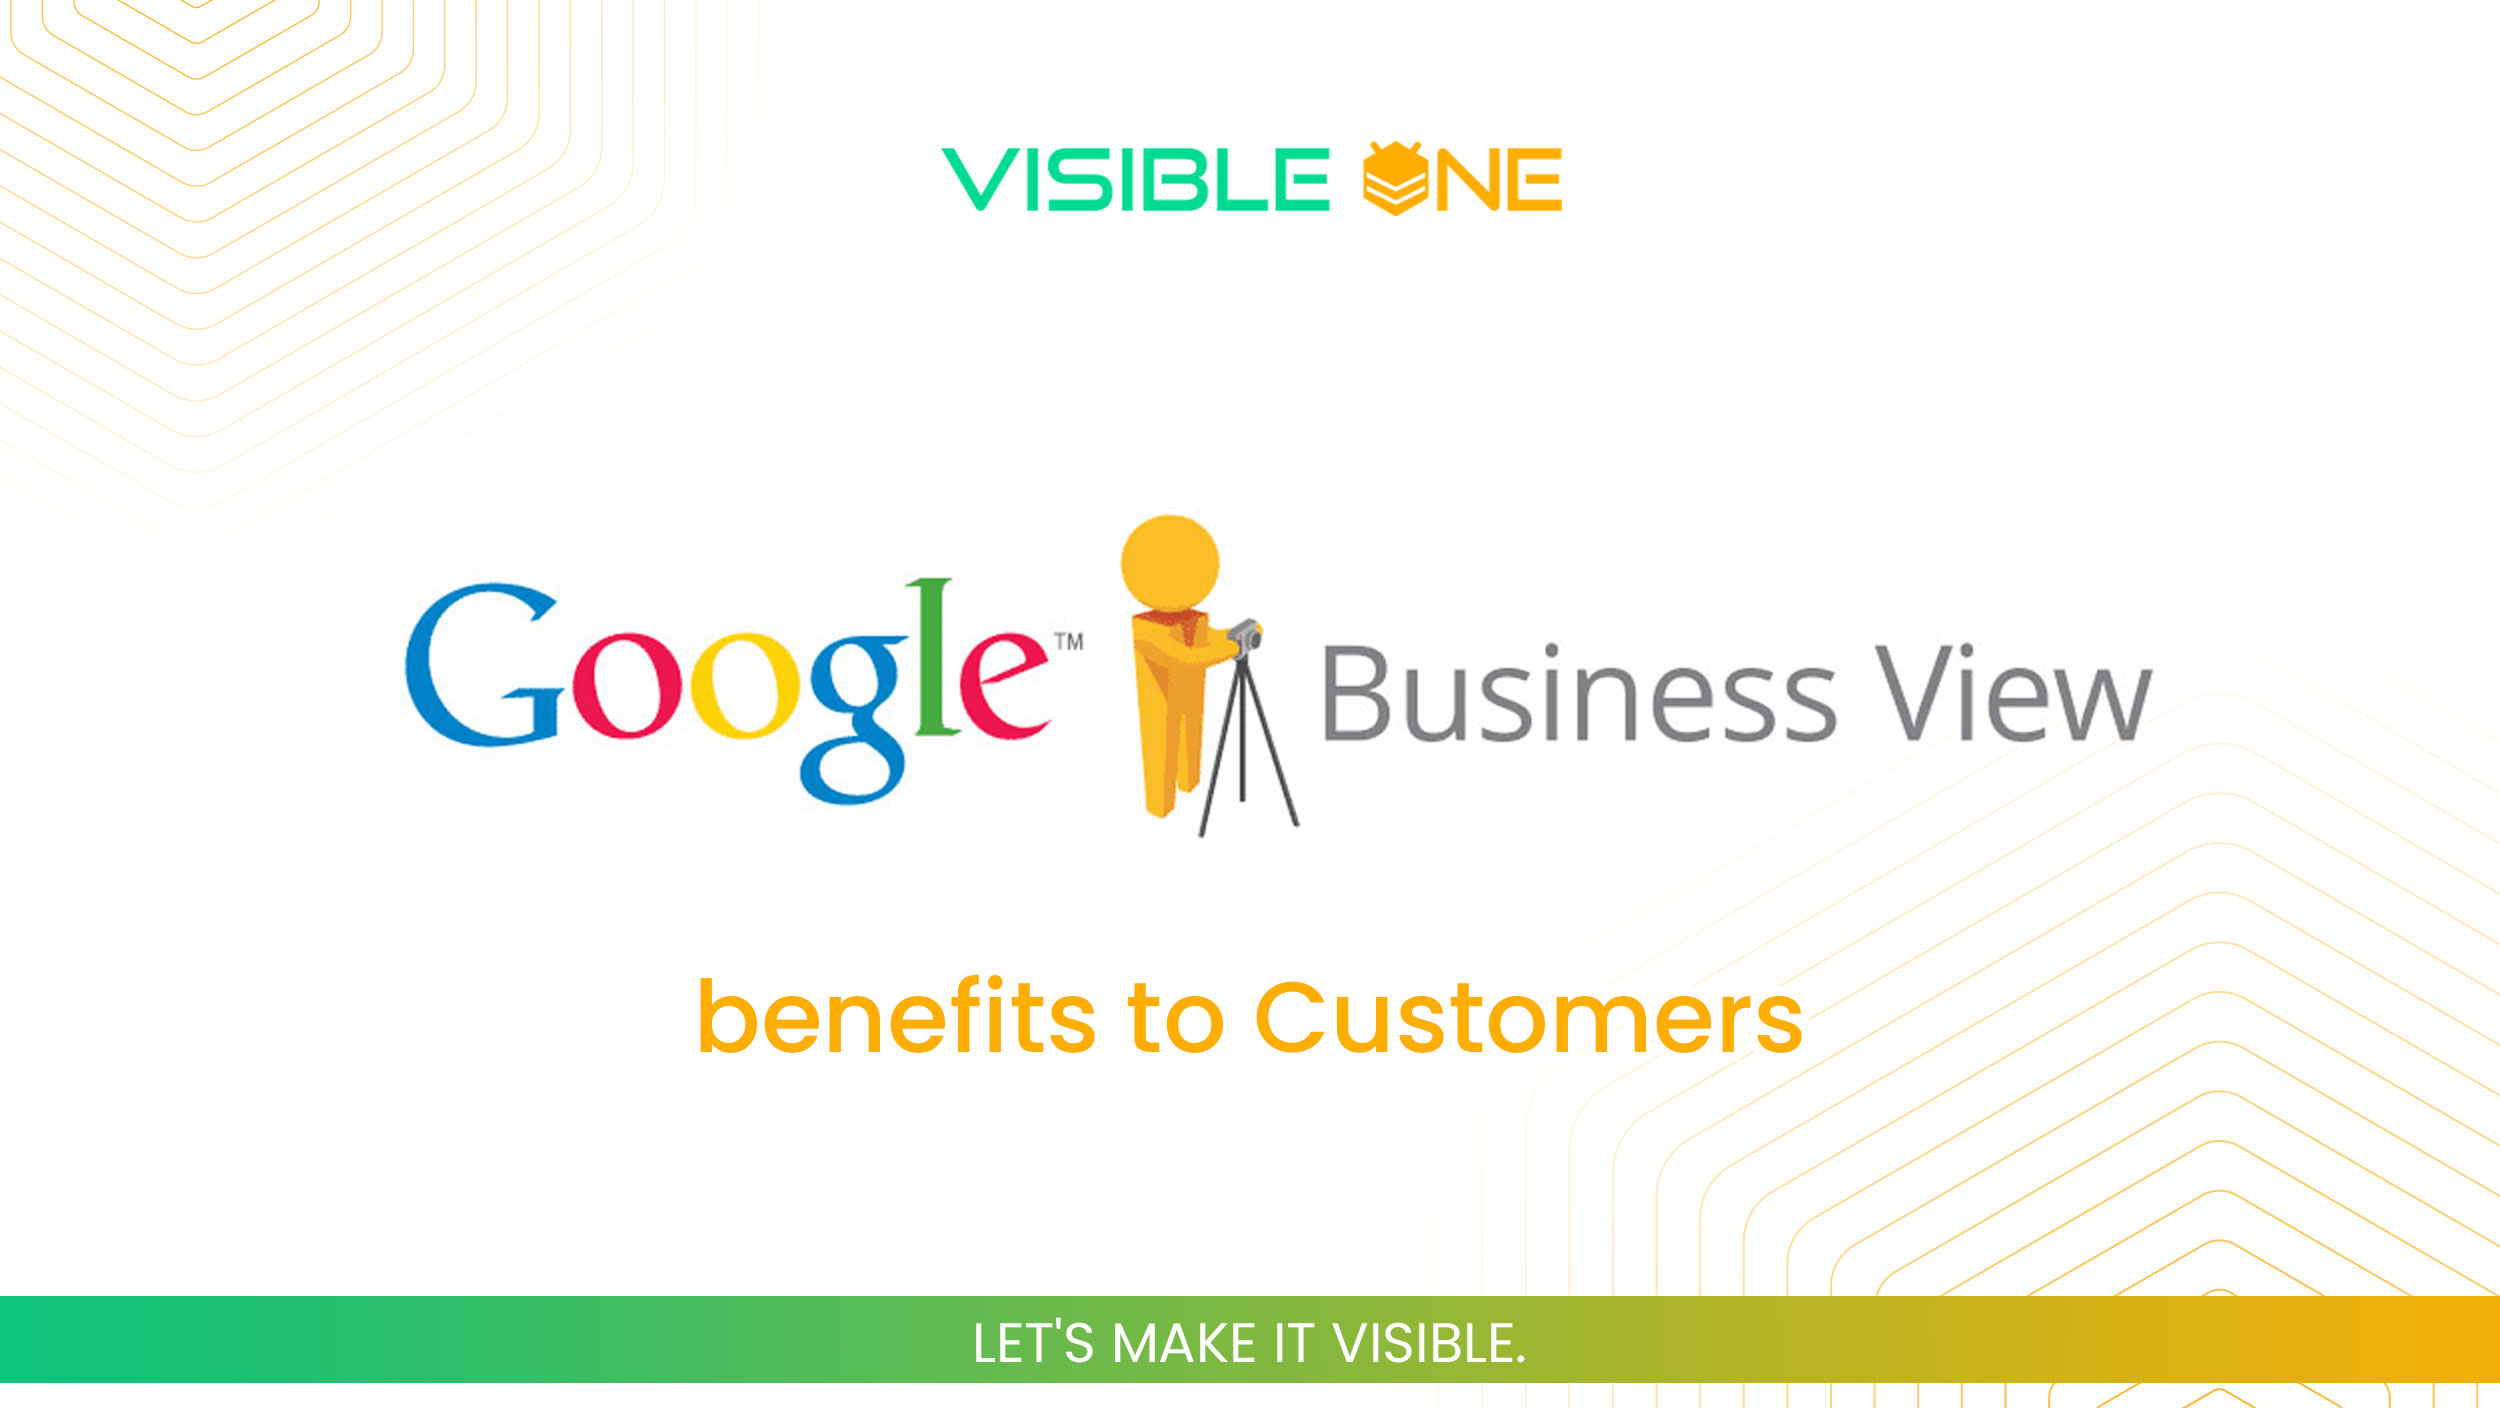 Google Business View benefits to Customers